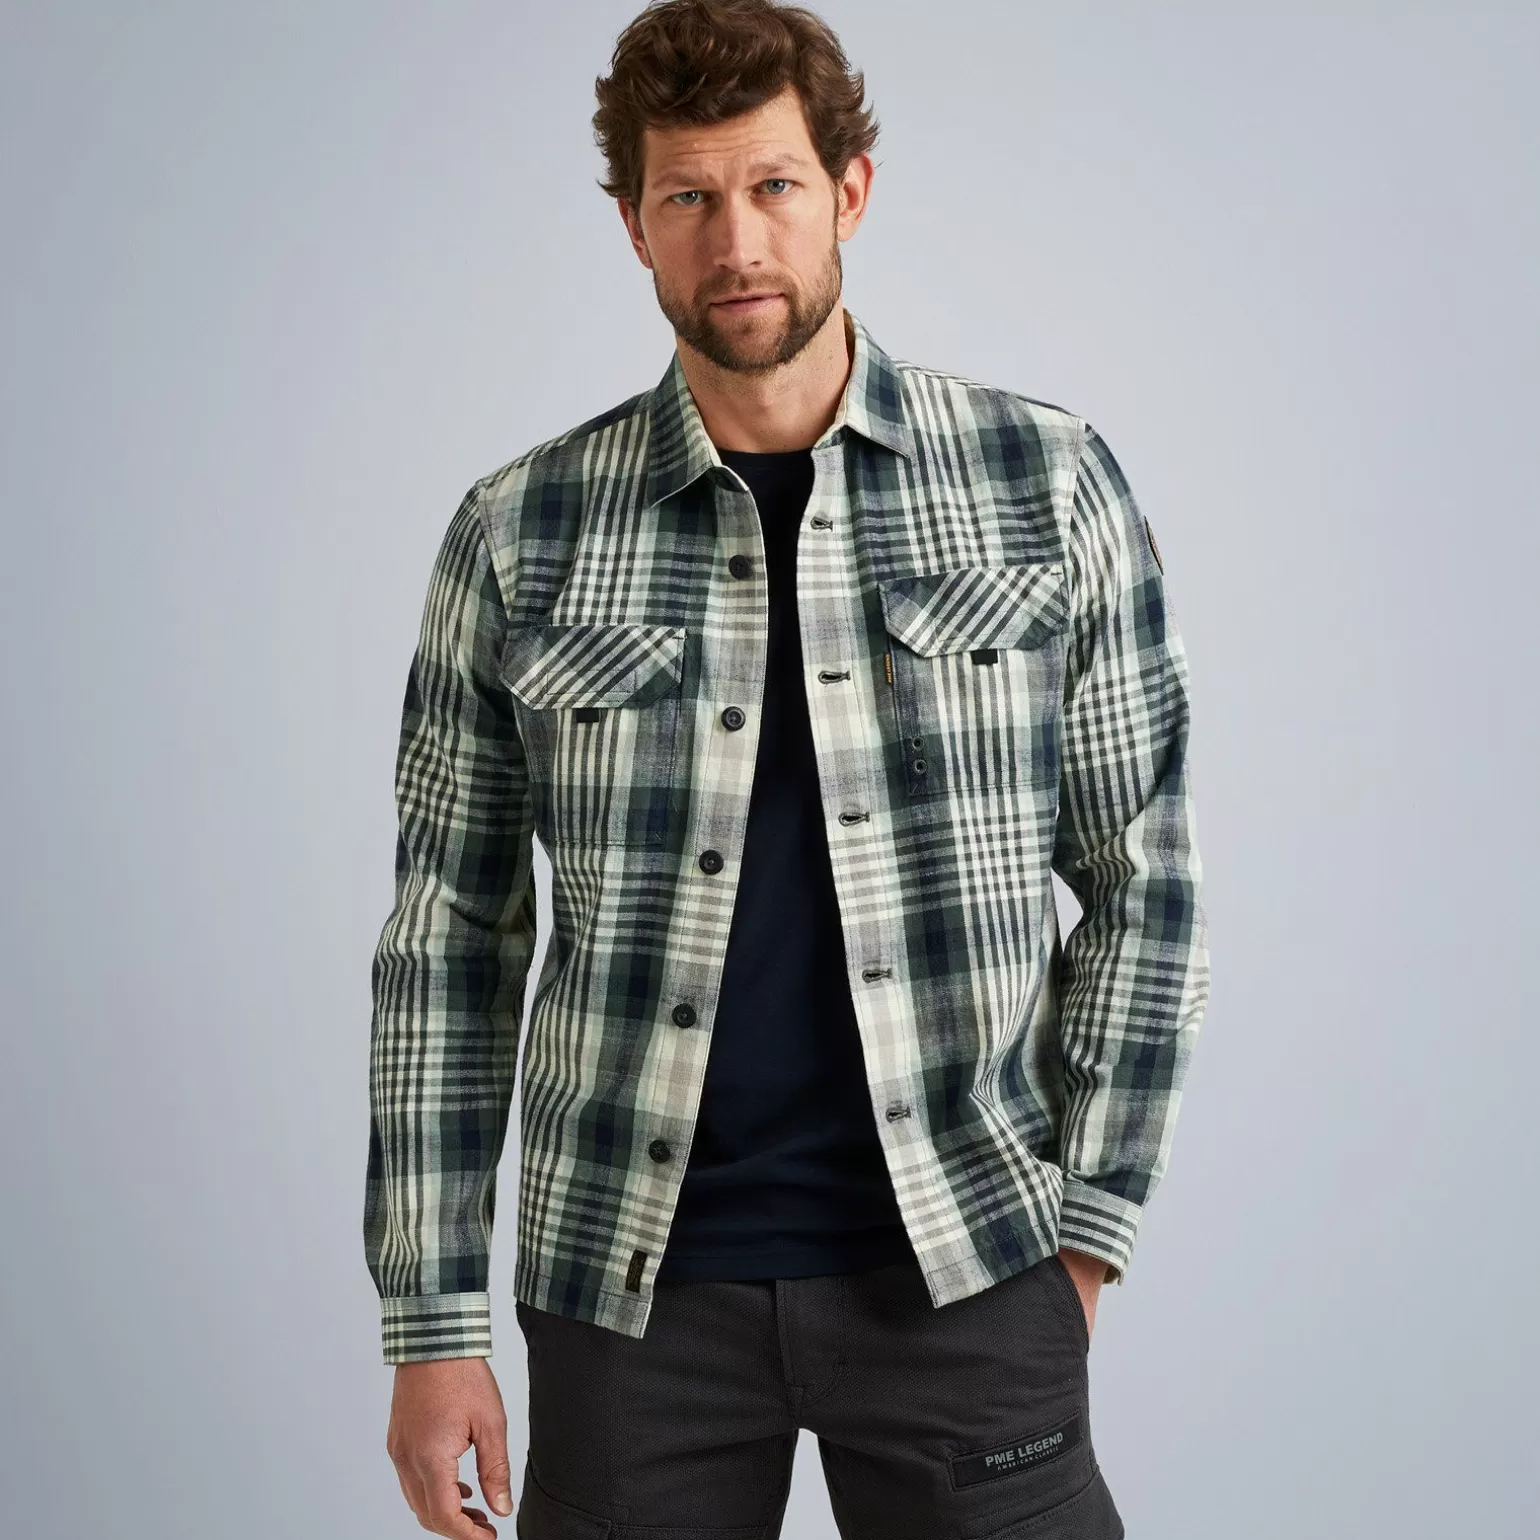 Tops*PME Legend Tops Shirt With Check Pattern